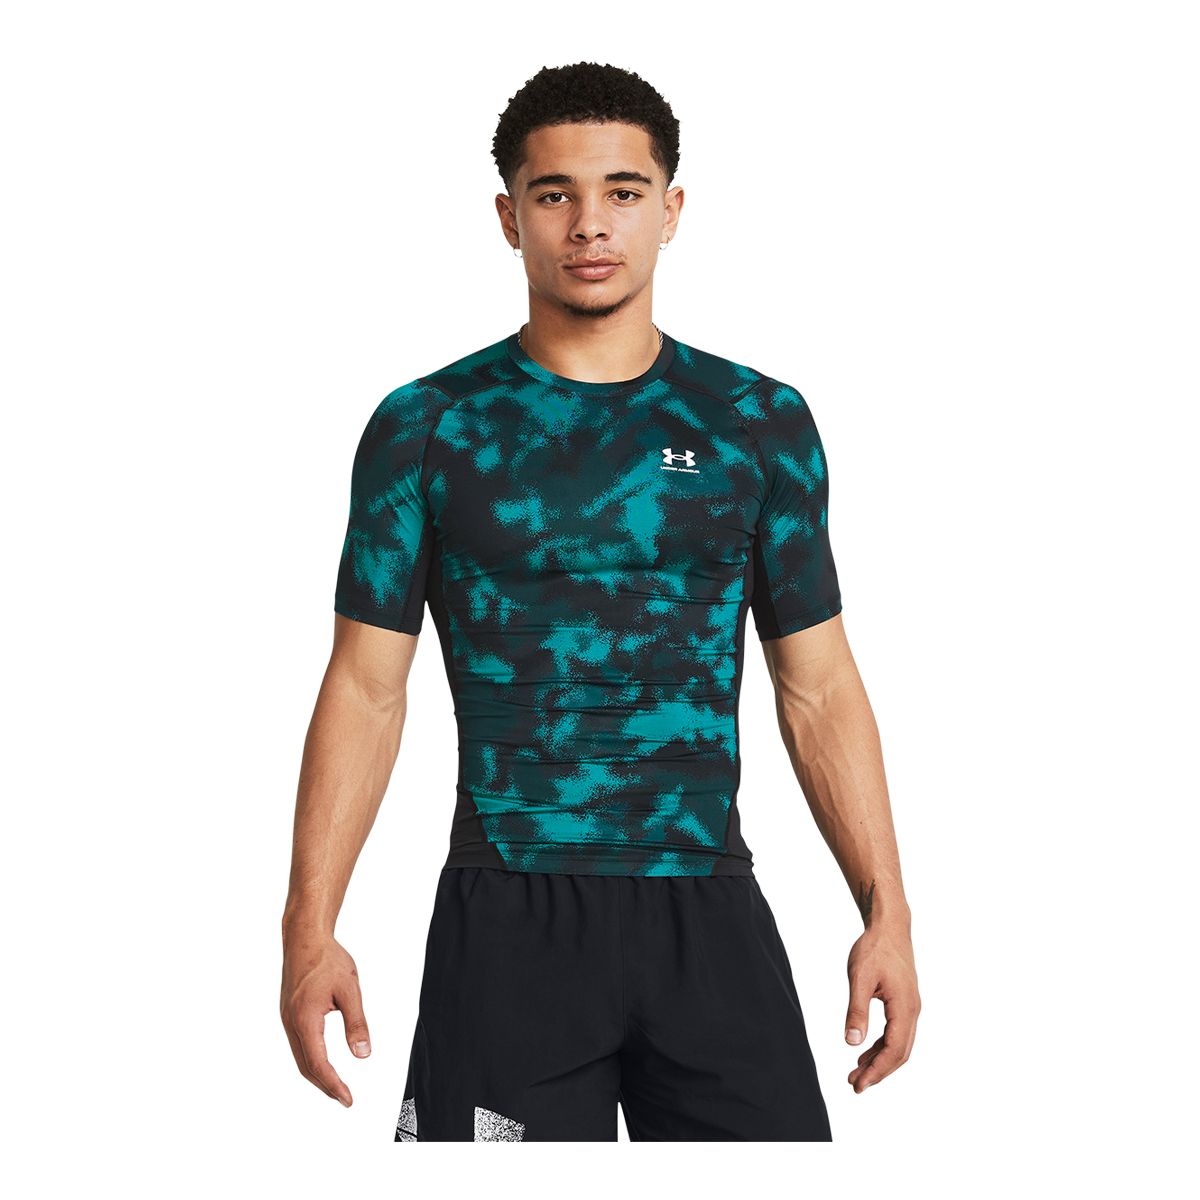 Image of Under Armour Men's HeatGear© Armour Compression Printed T Shirt